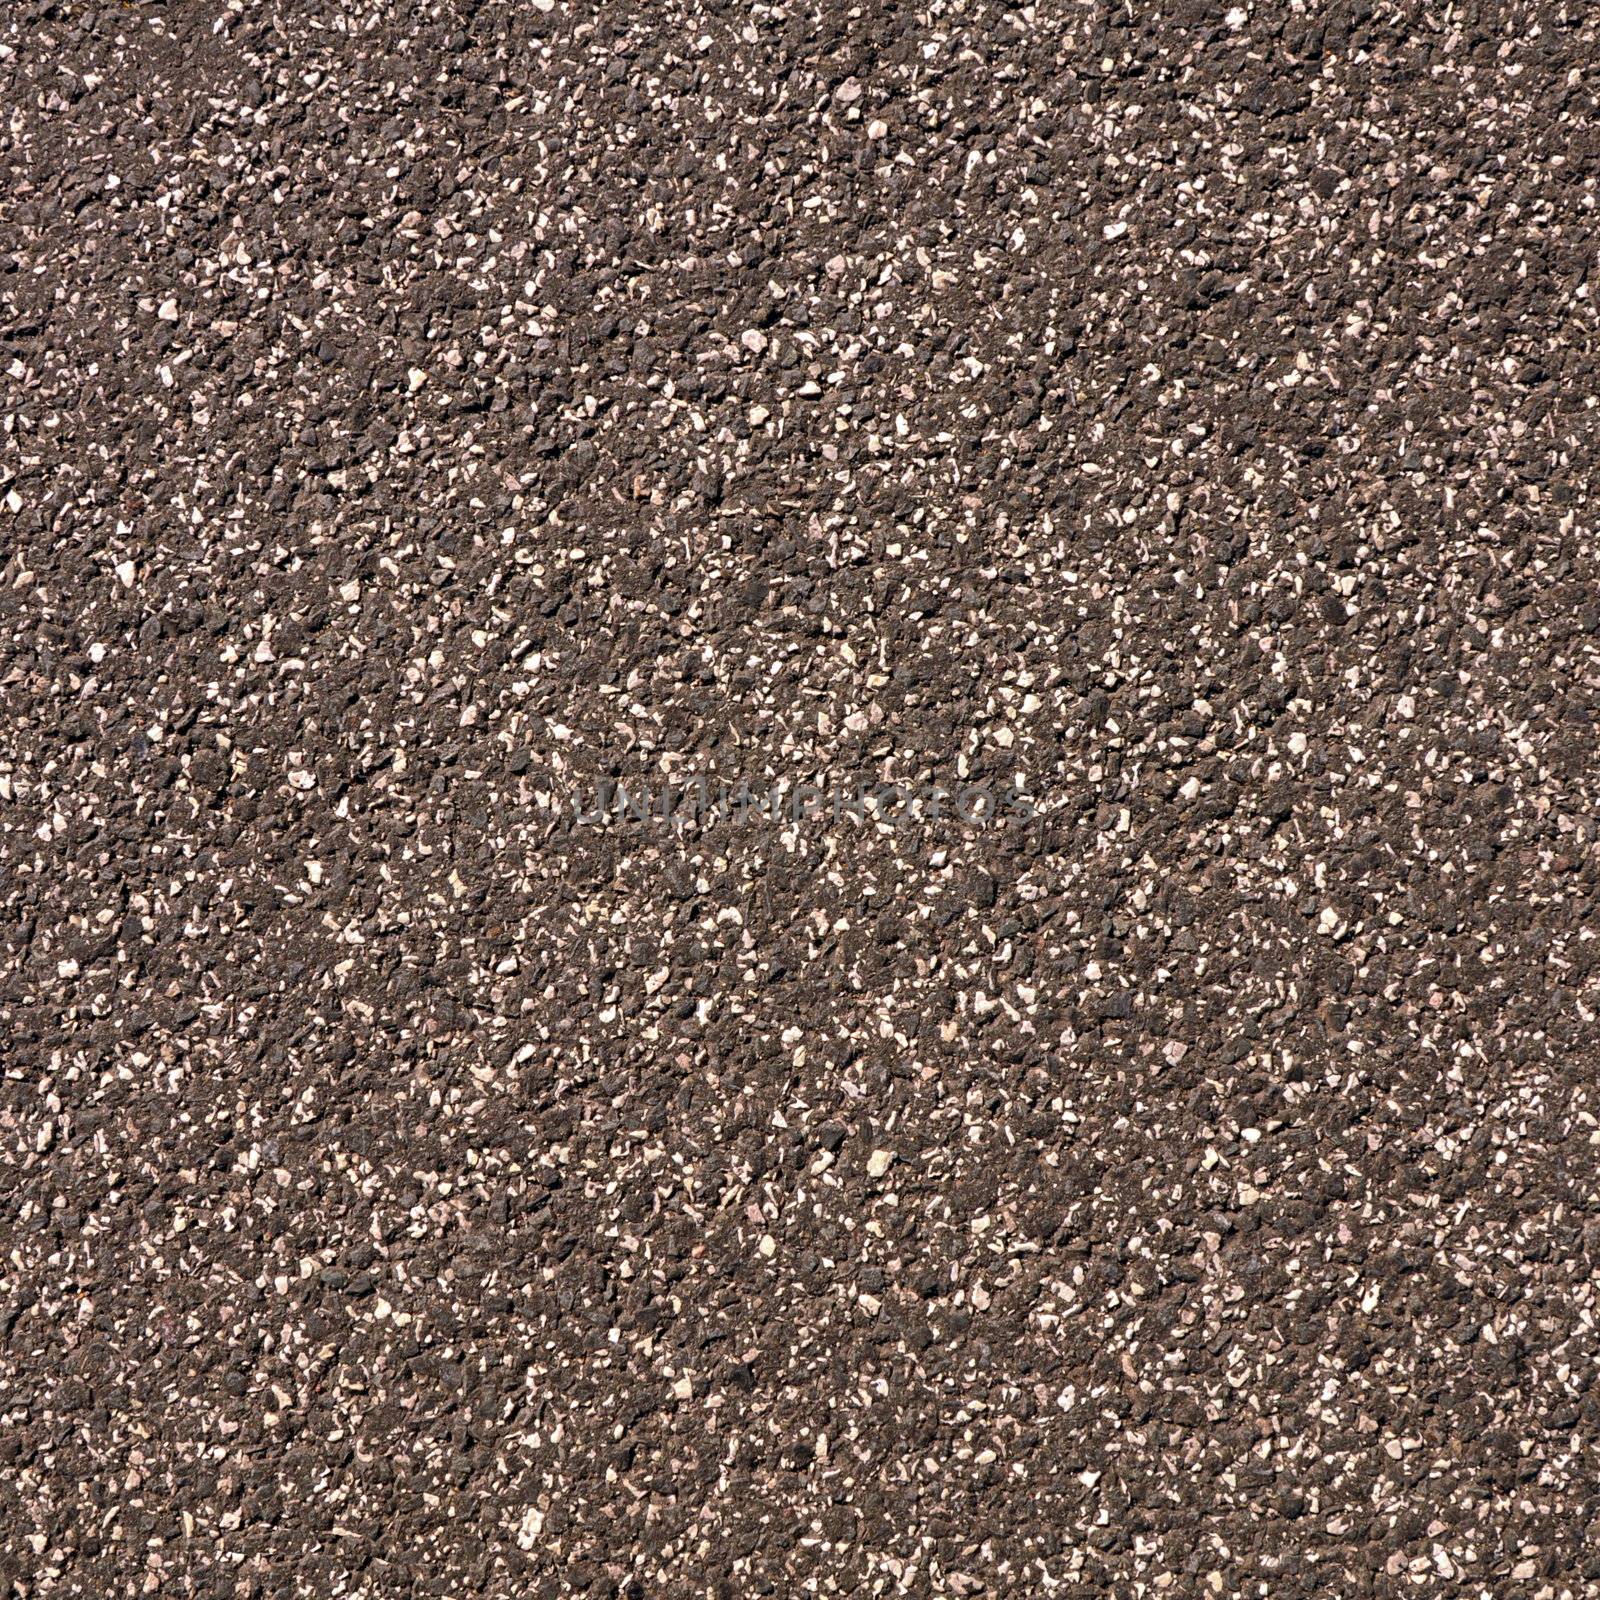 texture of new black asphalt from a road or street